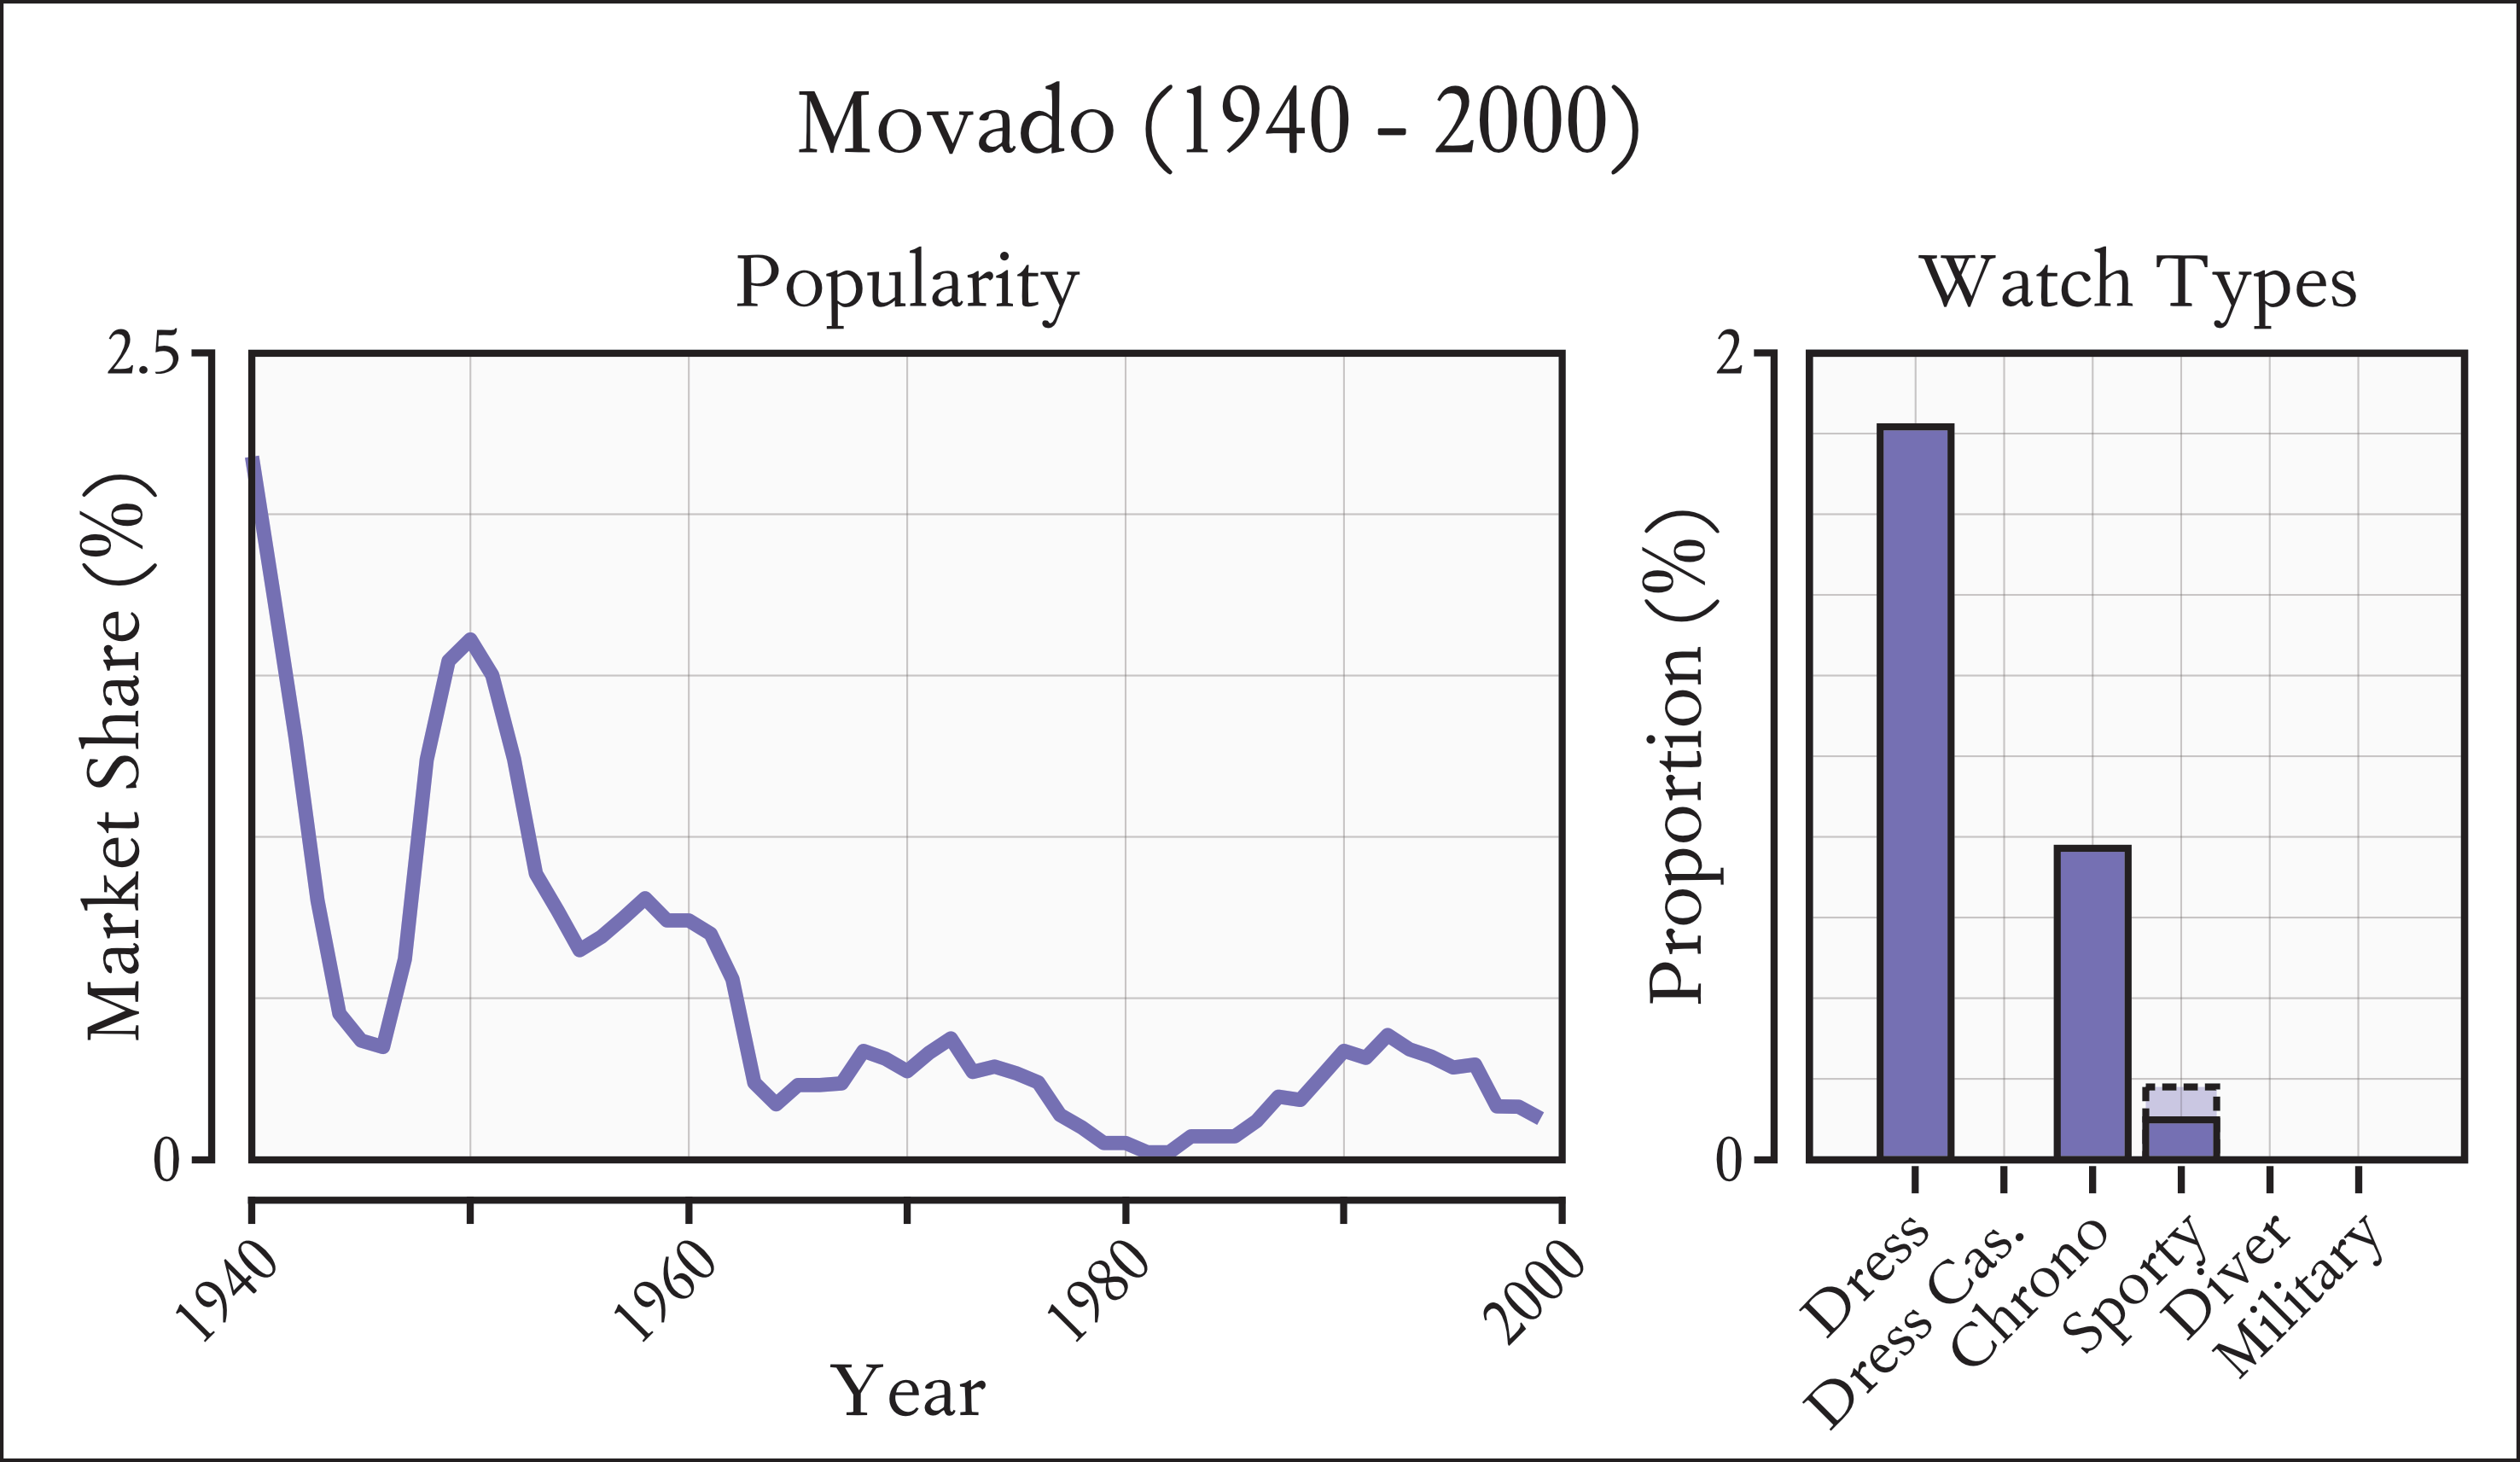 Distribution of Movado popularity from 1940 to 2000